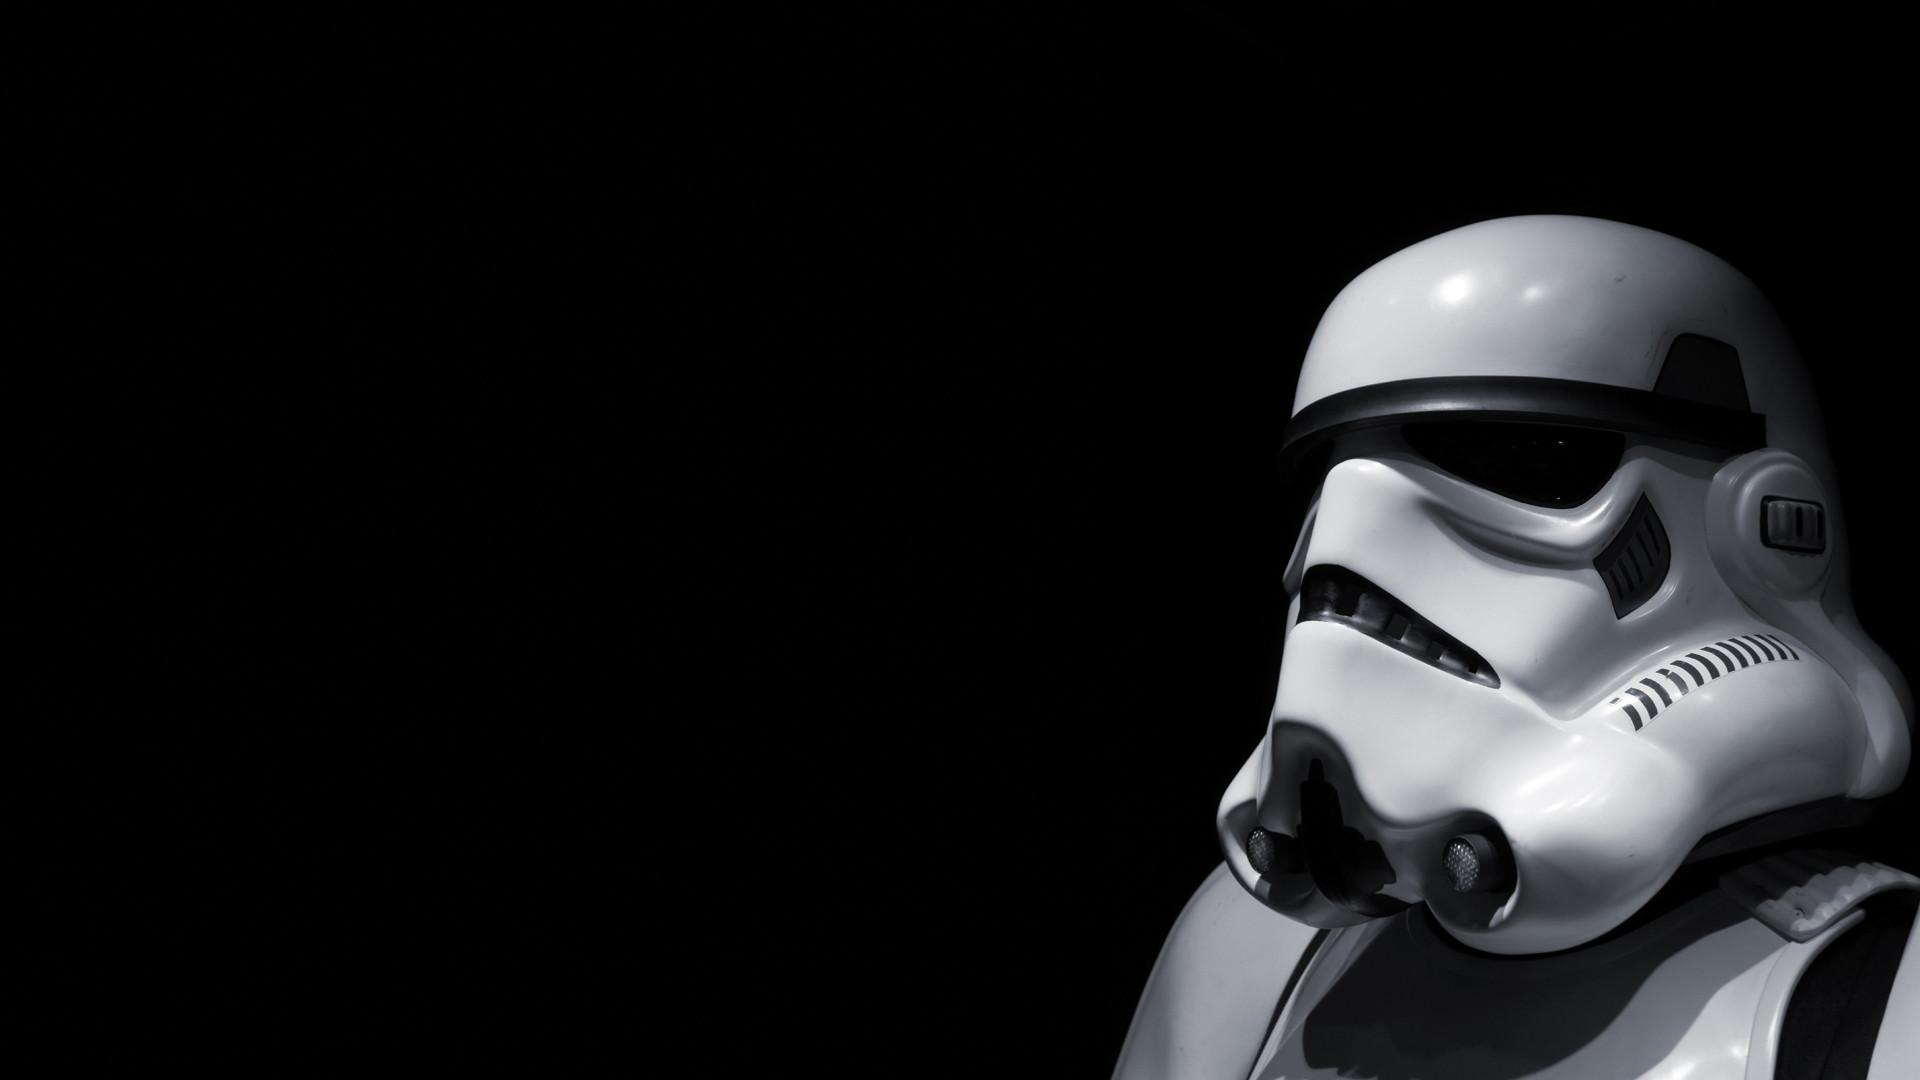 Stormtrooper [1920x1080] I shot this photo of the stormtrooper